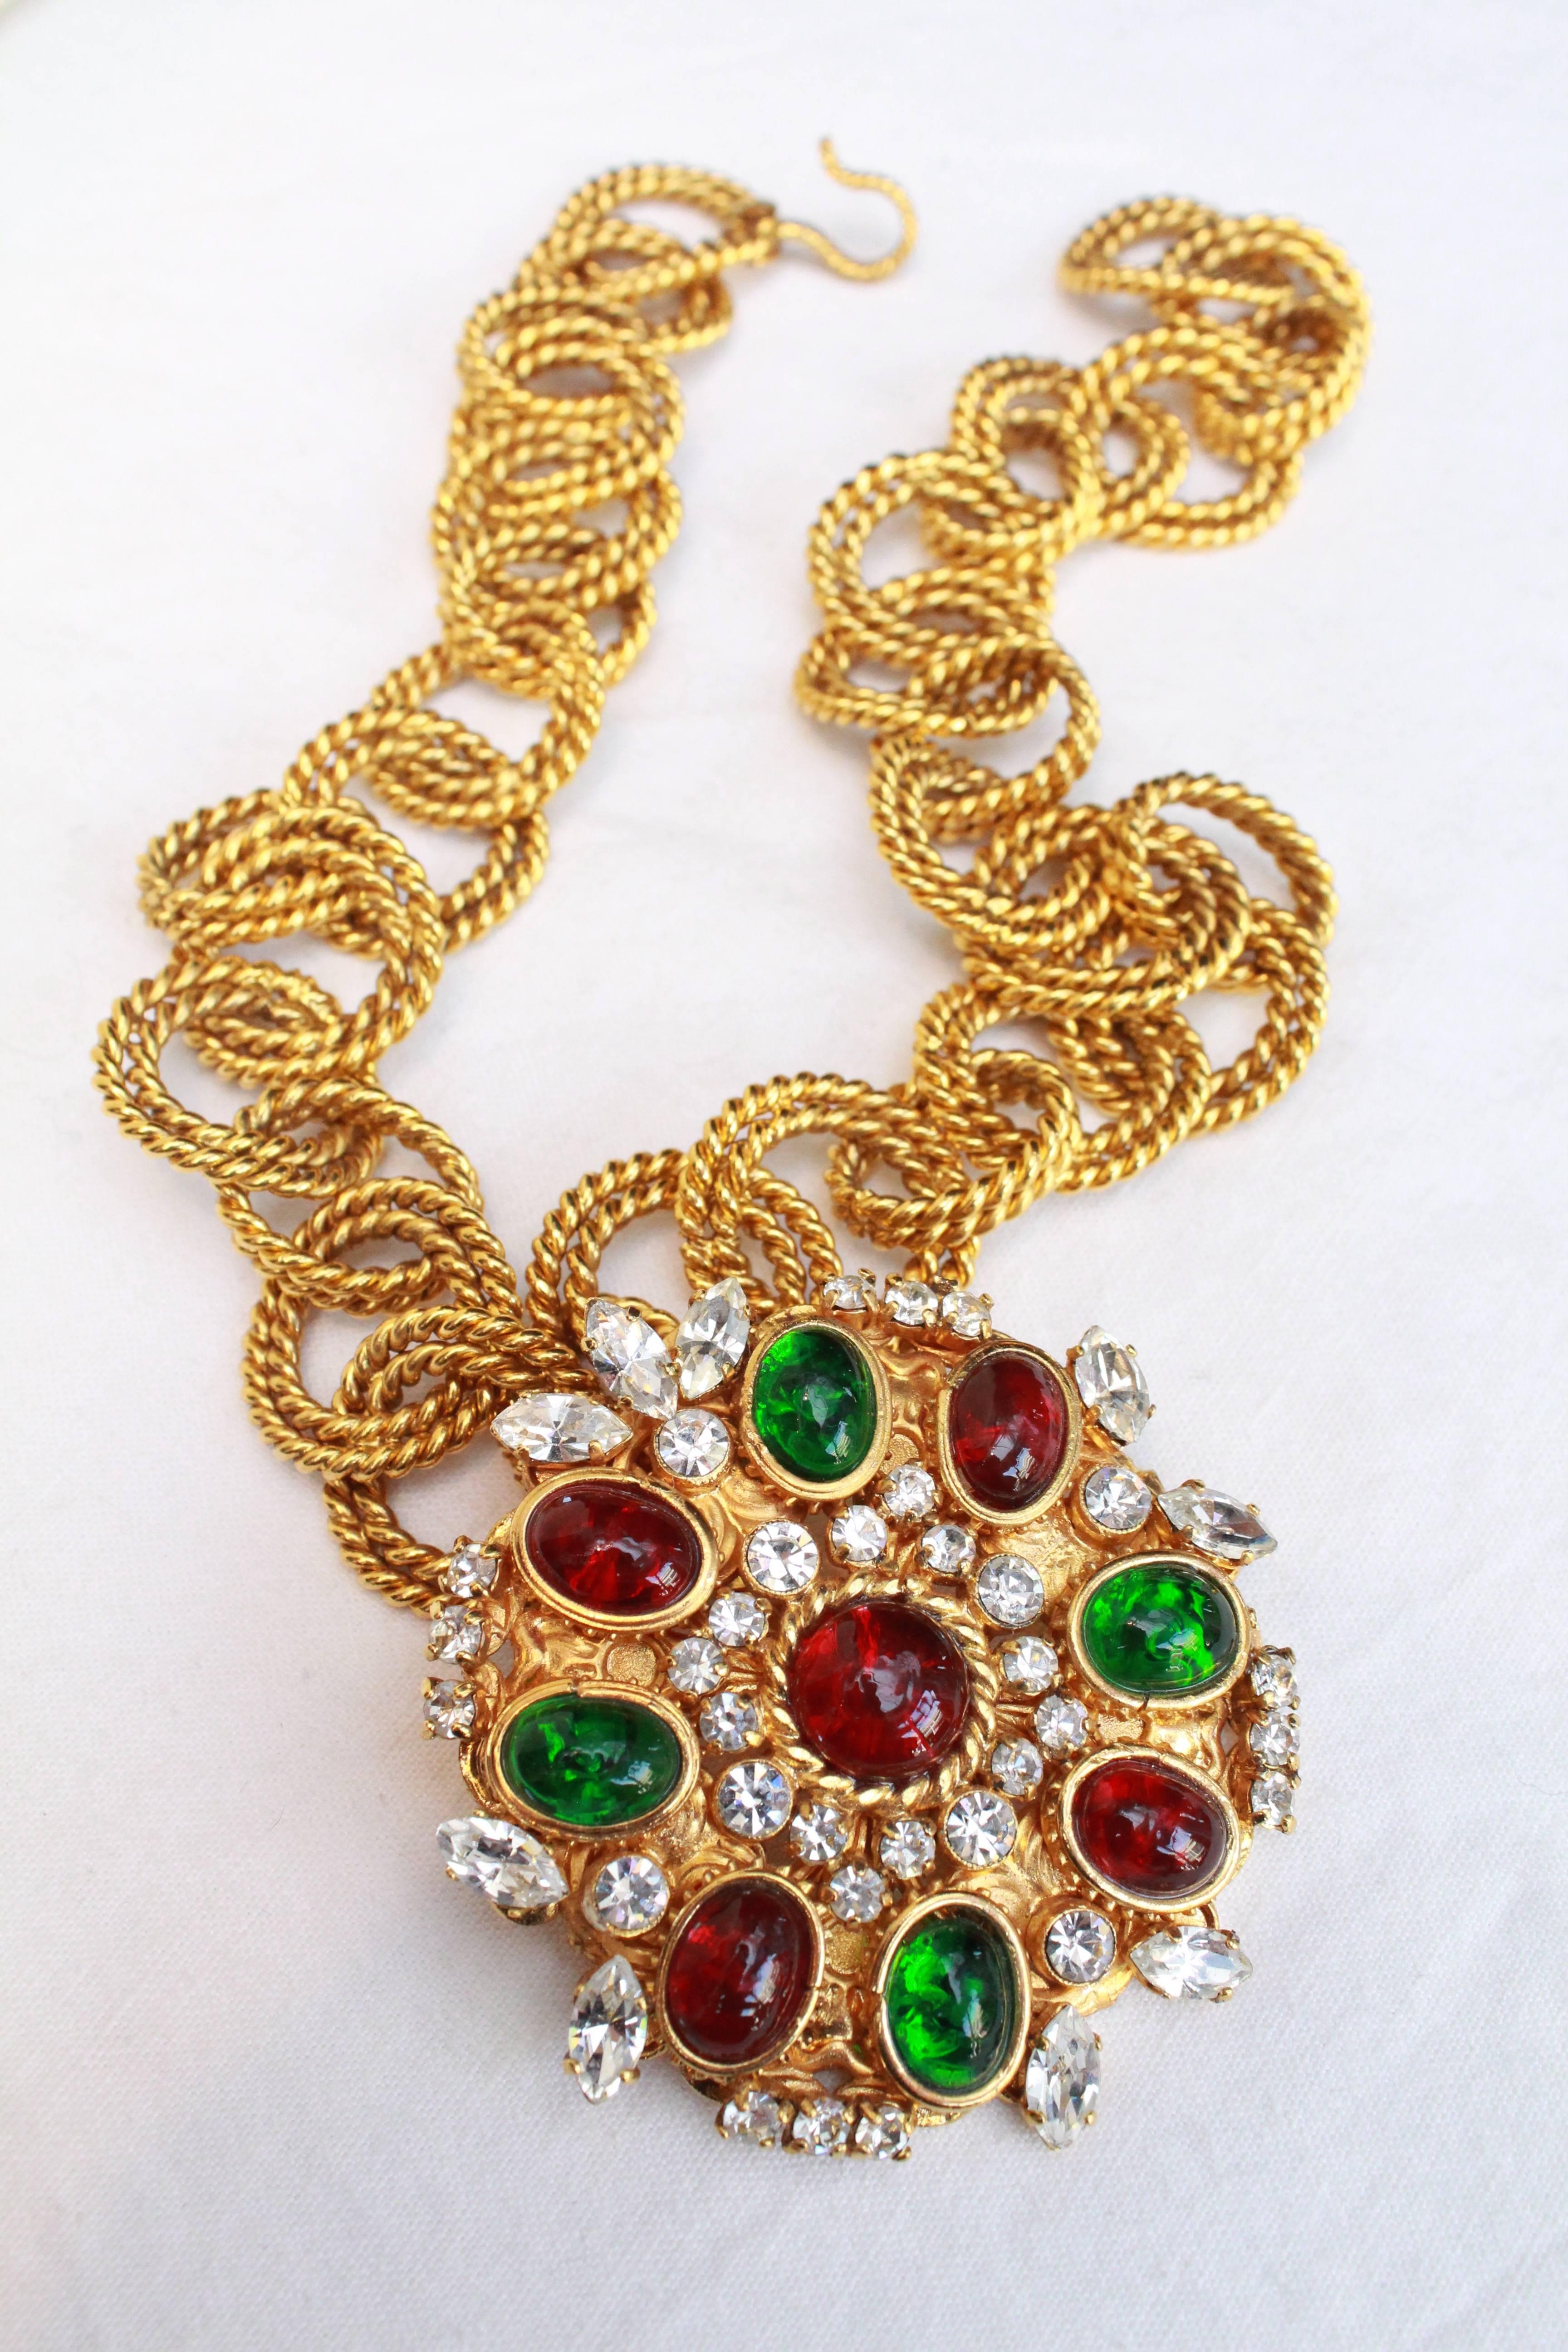 Women's 1990s Chanel gilded metal short necklace composed of large chain and a pendant